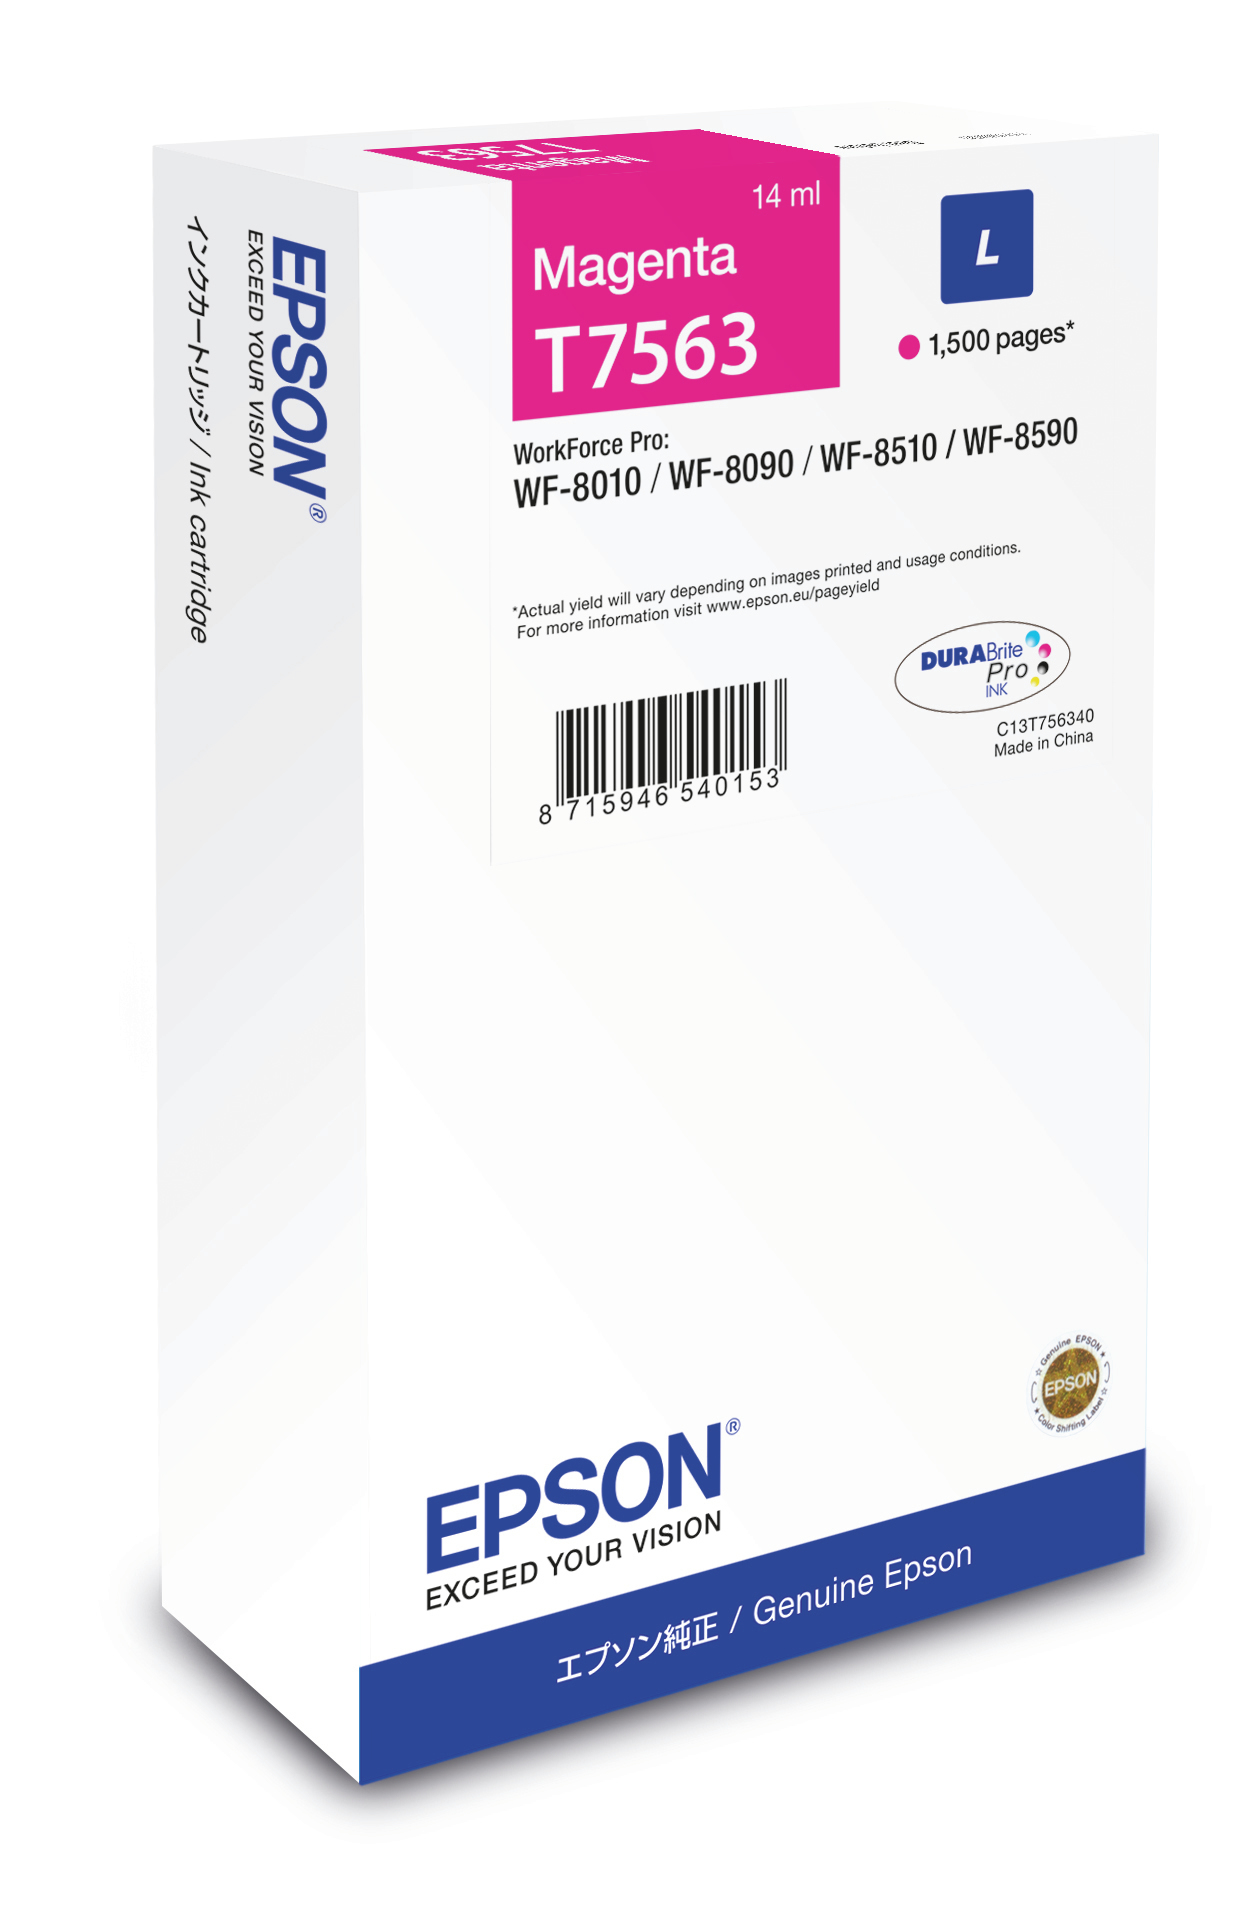 Tanica Magenta L Epson Business Ink S3 C13t756340 8715946540153